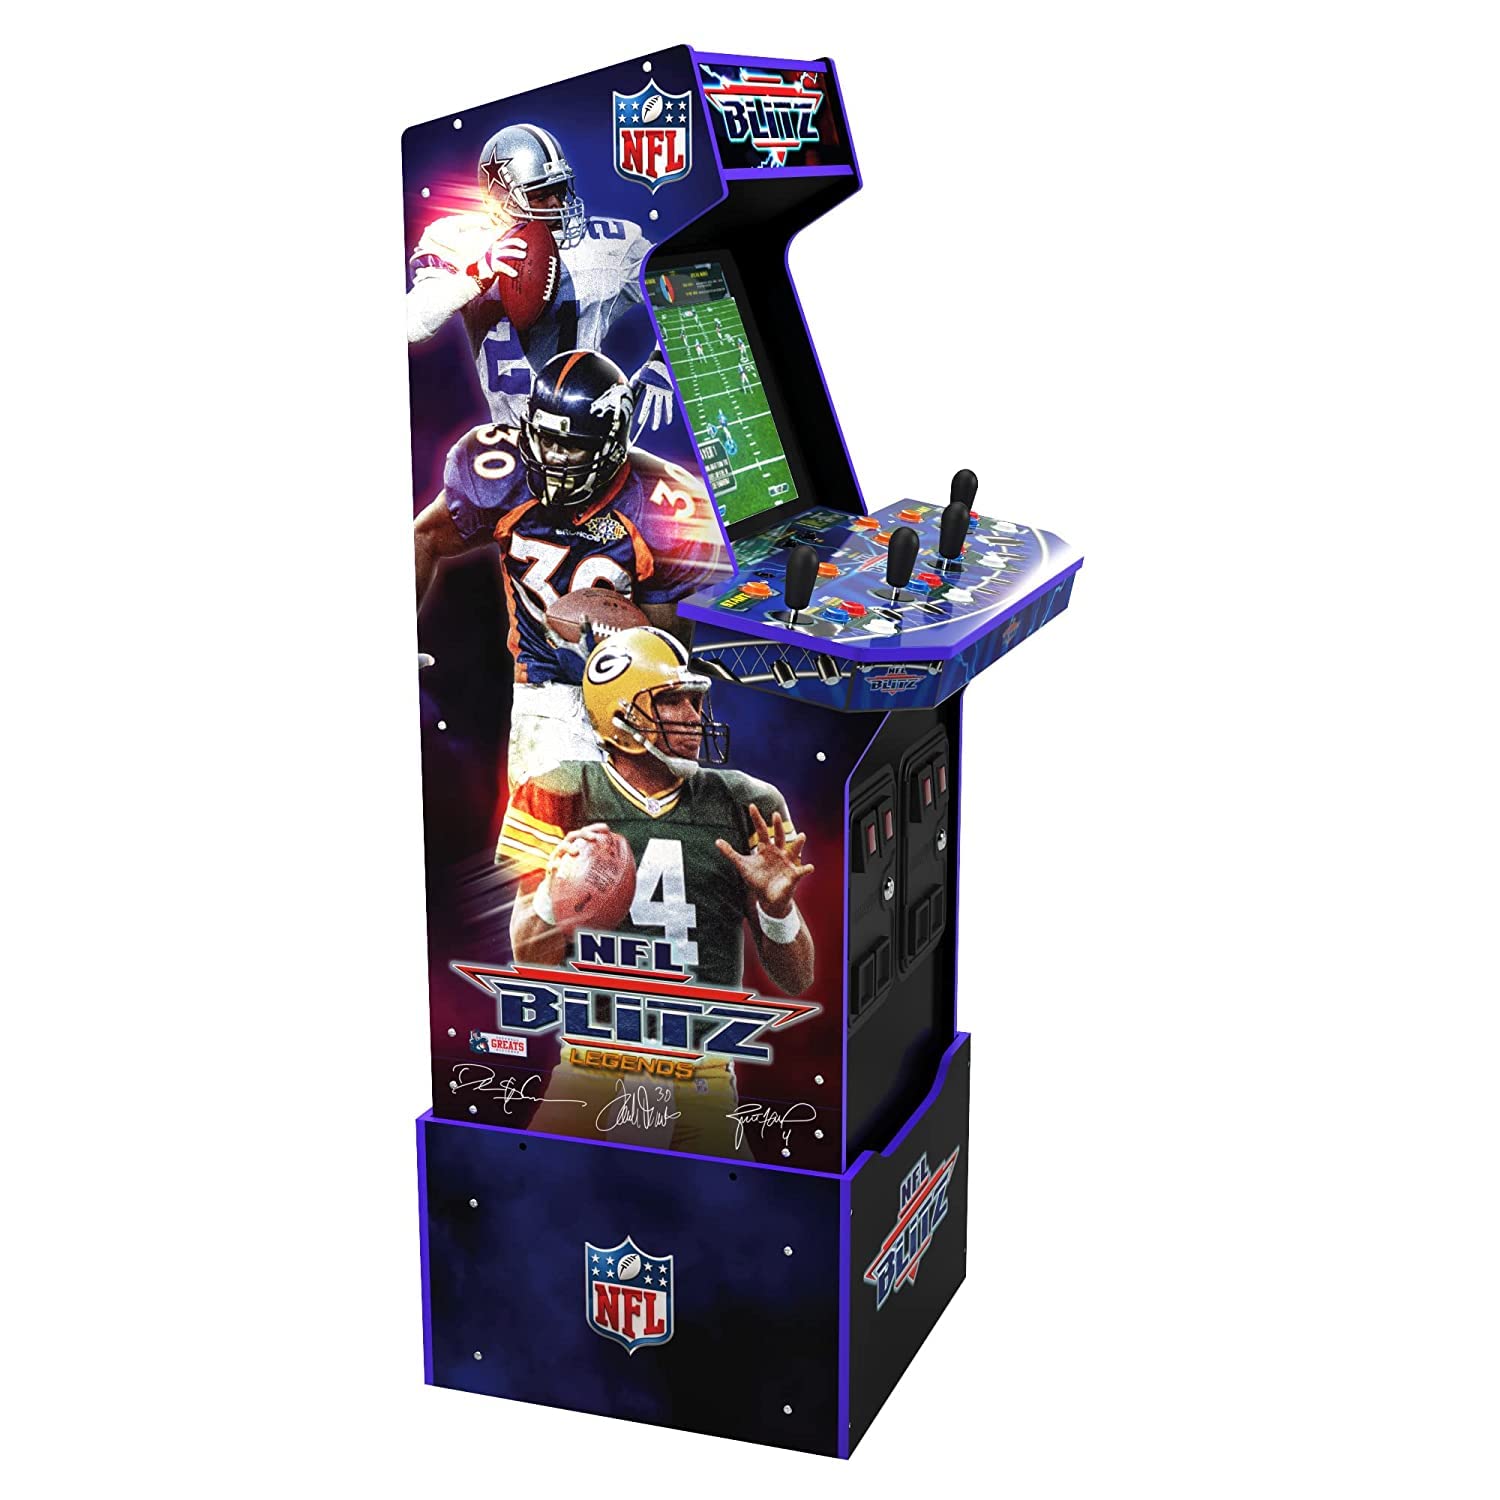 Arcade1Up NFL Blitz Legends Arcade Machine - 4 Player, 5-foot tall full-size stand-up game for home with WiFi for online multiplayer, leaderboards, and a light-up marquee